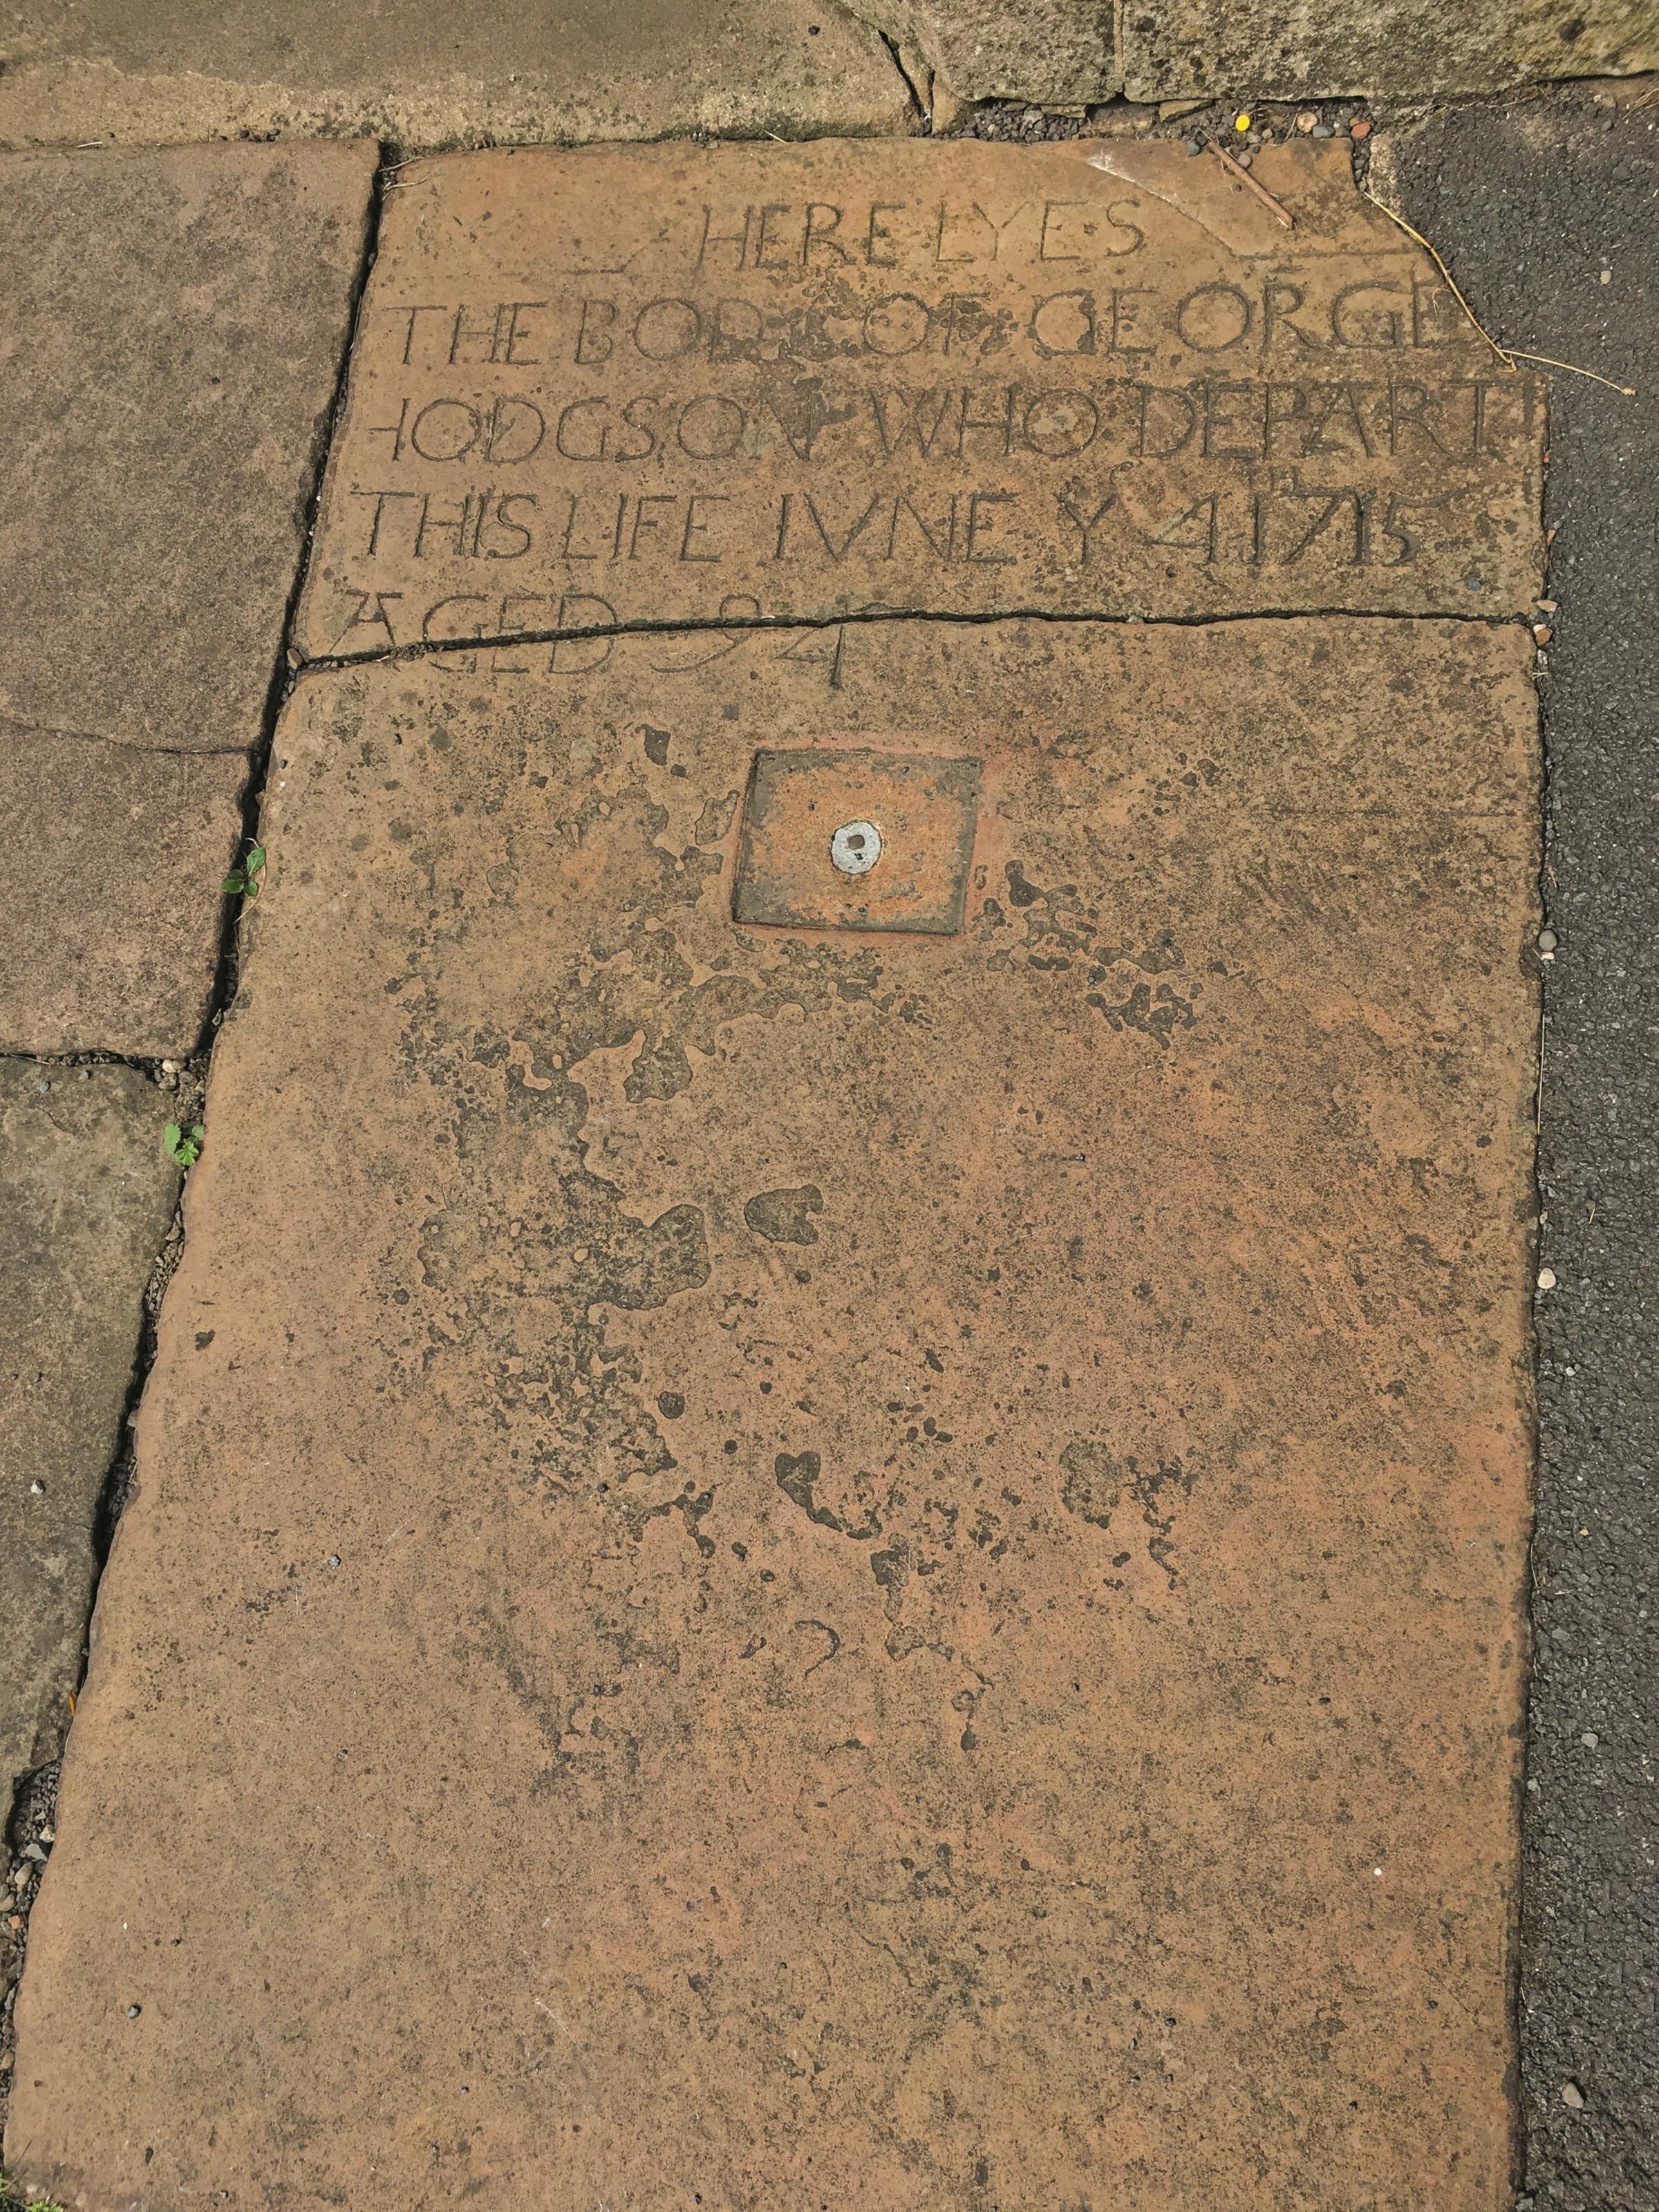 The gravestone of the Dent Vampire, clearly showing the mark where the stake was driven through its heart